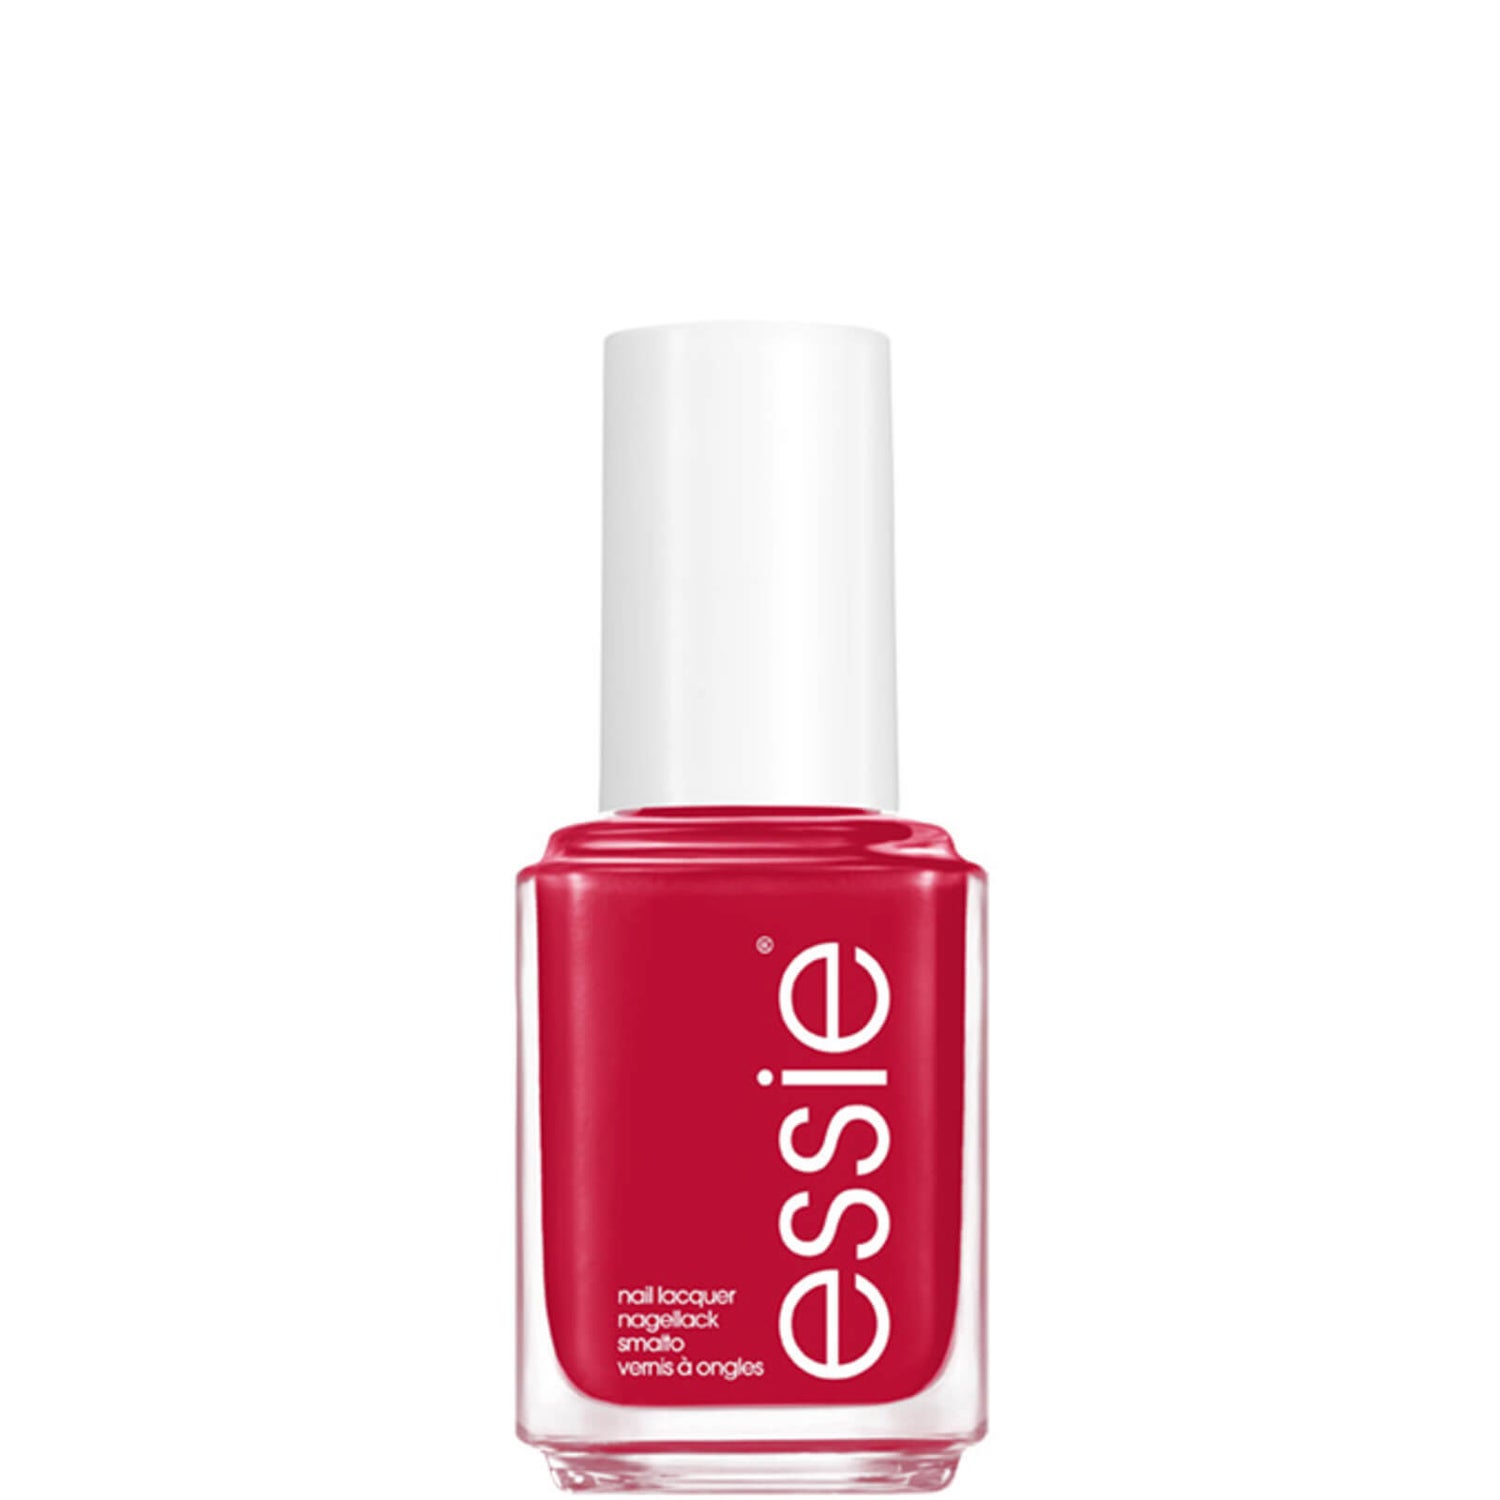 essie Nail Polish - 771 Been There London That 13.5ml